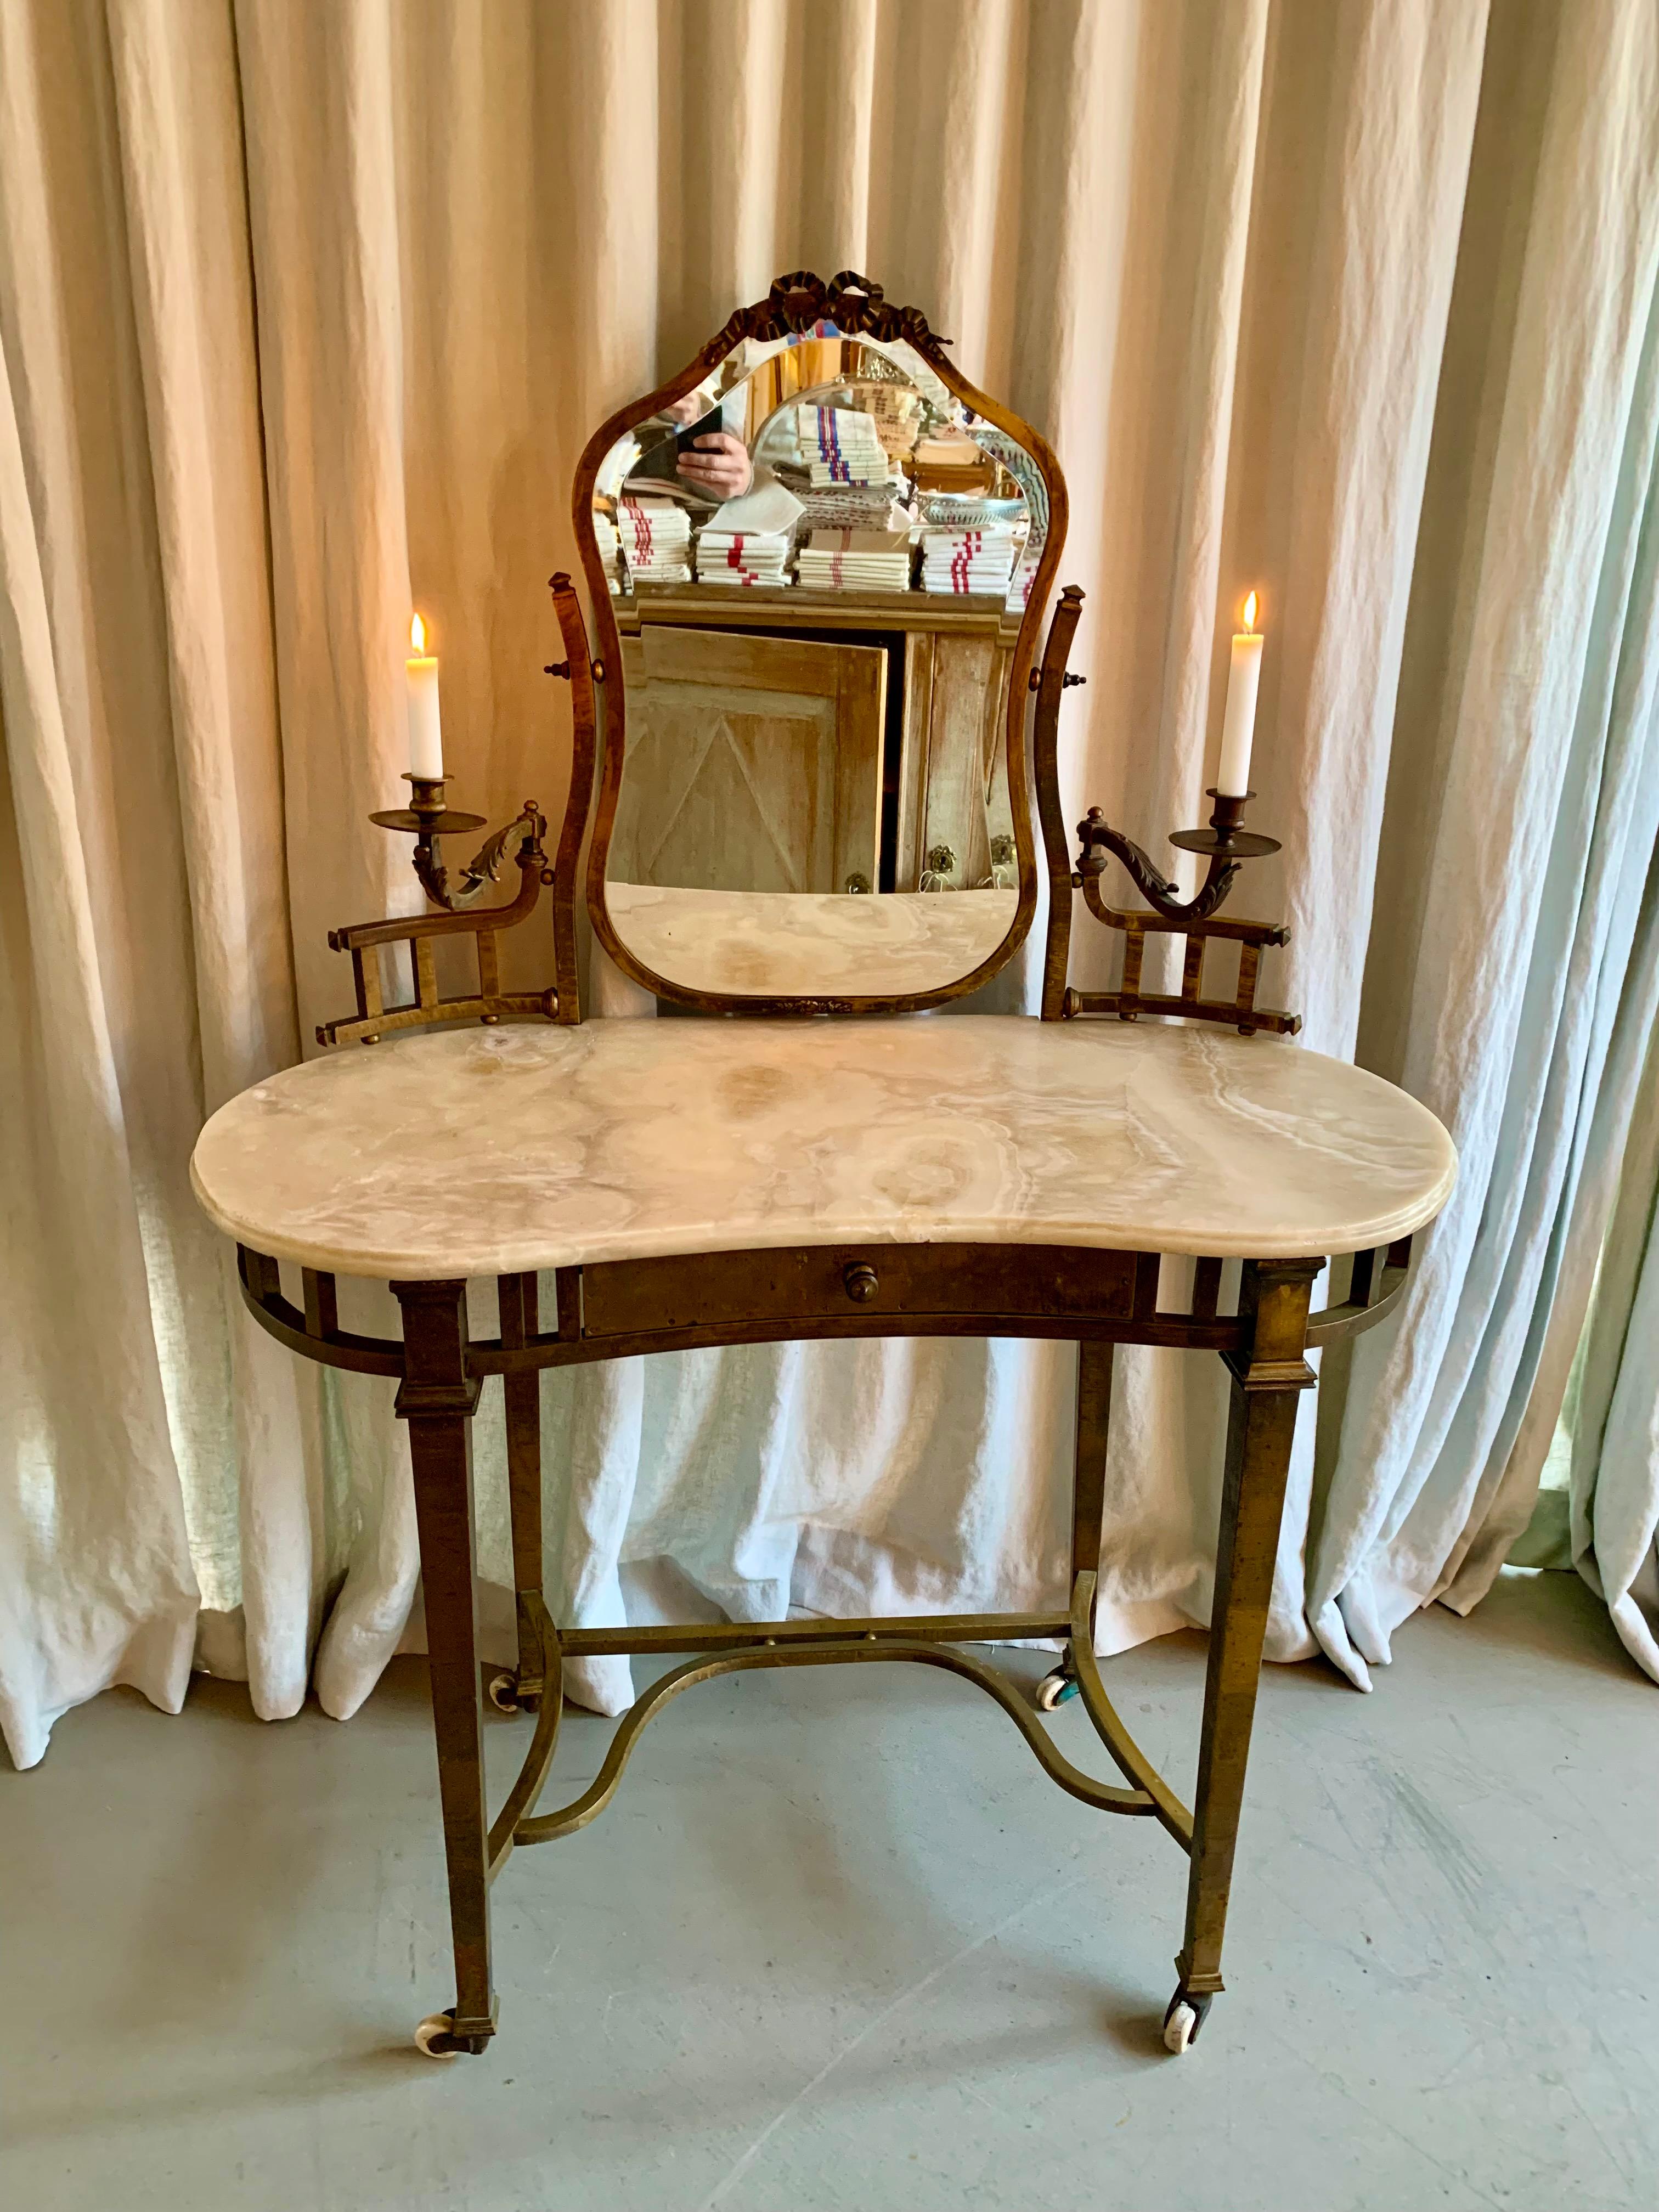 Gorgeous antique French patinated brass vanity with beautiful onyx kidney shaped table top. The elegant vanity has 2 light holders for candles and a drawer plus many fine ornamented details.